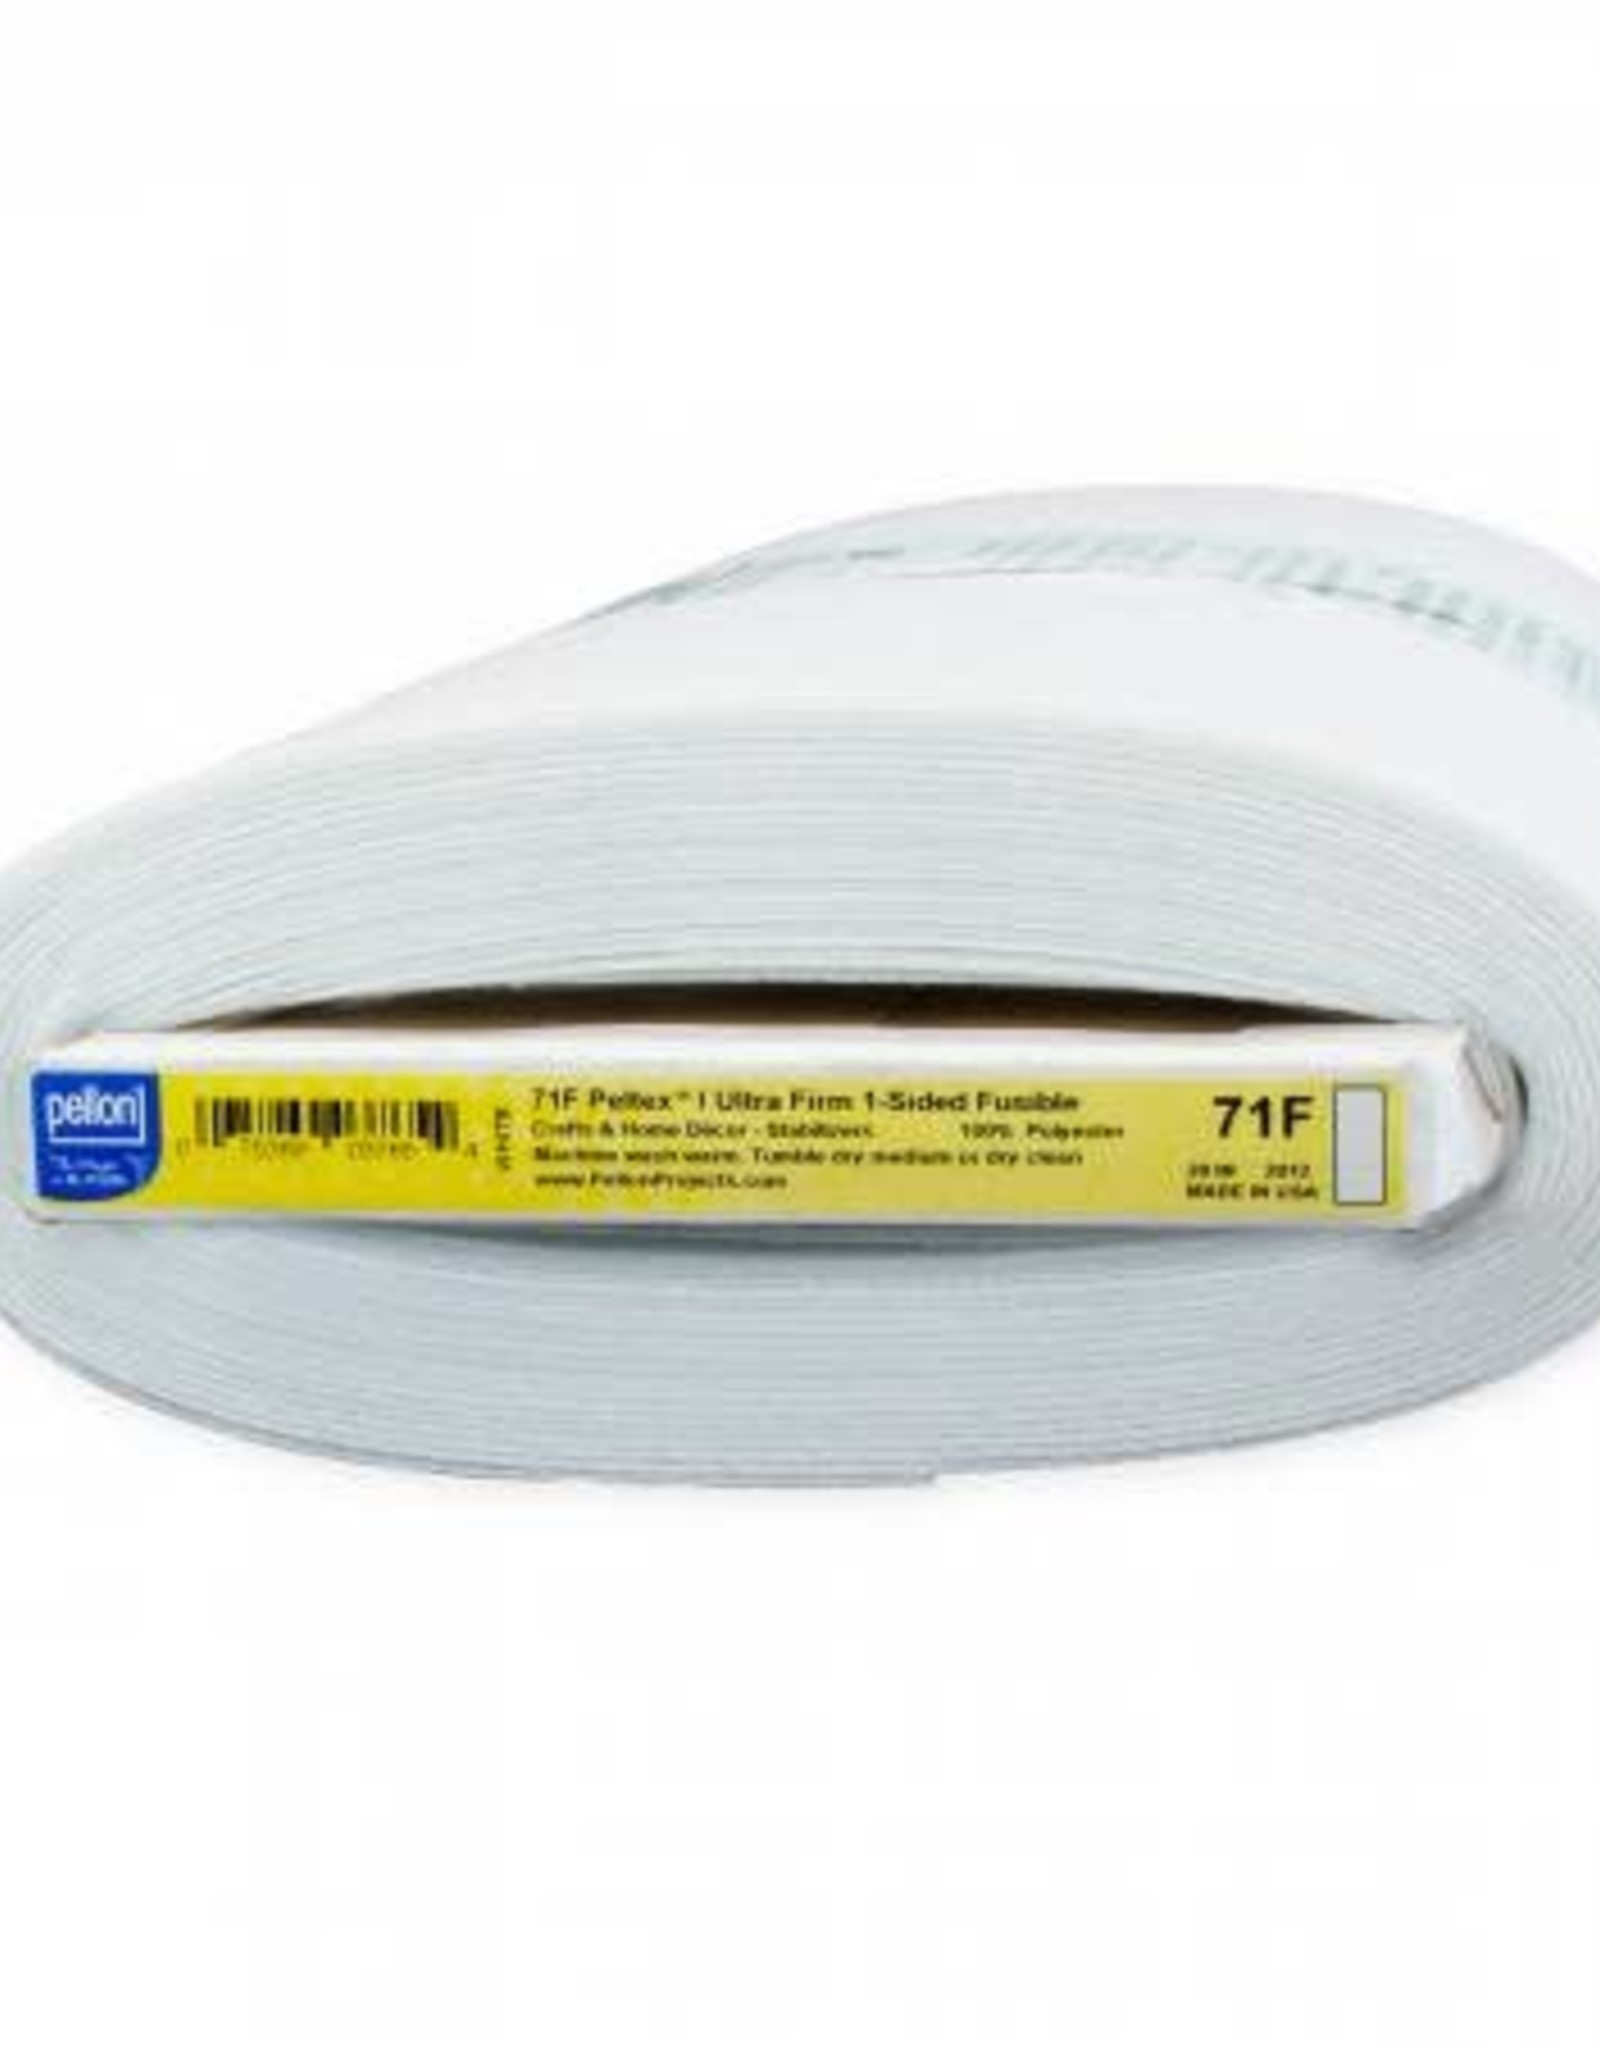 Peltex Single Sided Fusible 71FP